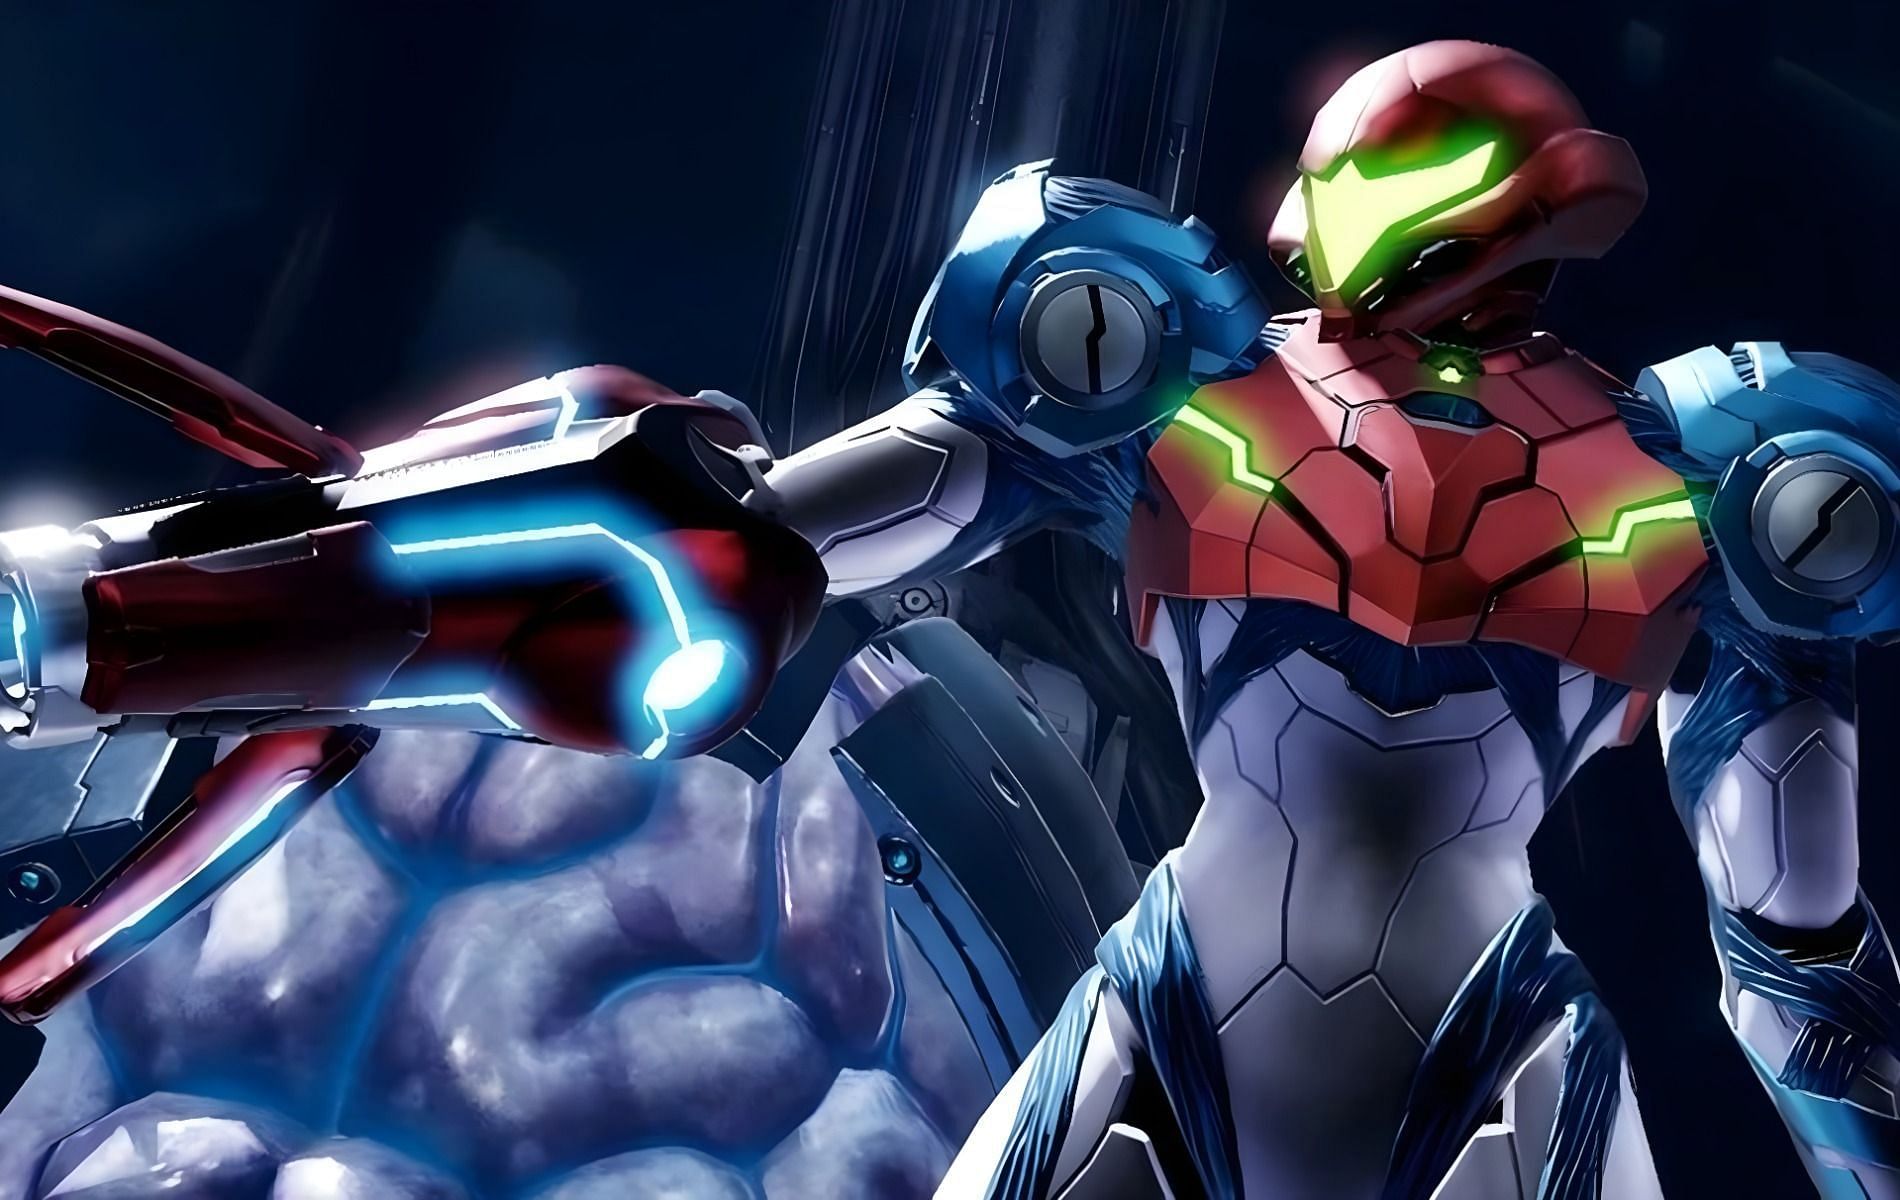 Metroid Dread version 2.1.0 official notes introduce three new modes: Boss  Rush, Survival Rush, and Dread Rush